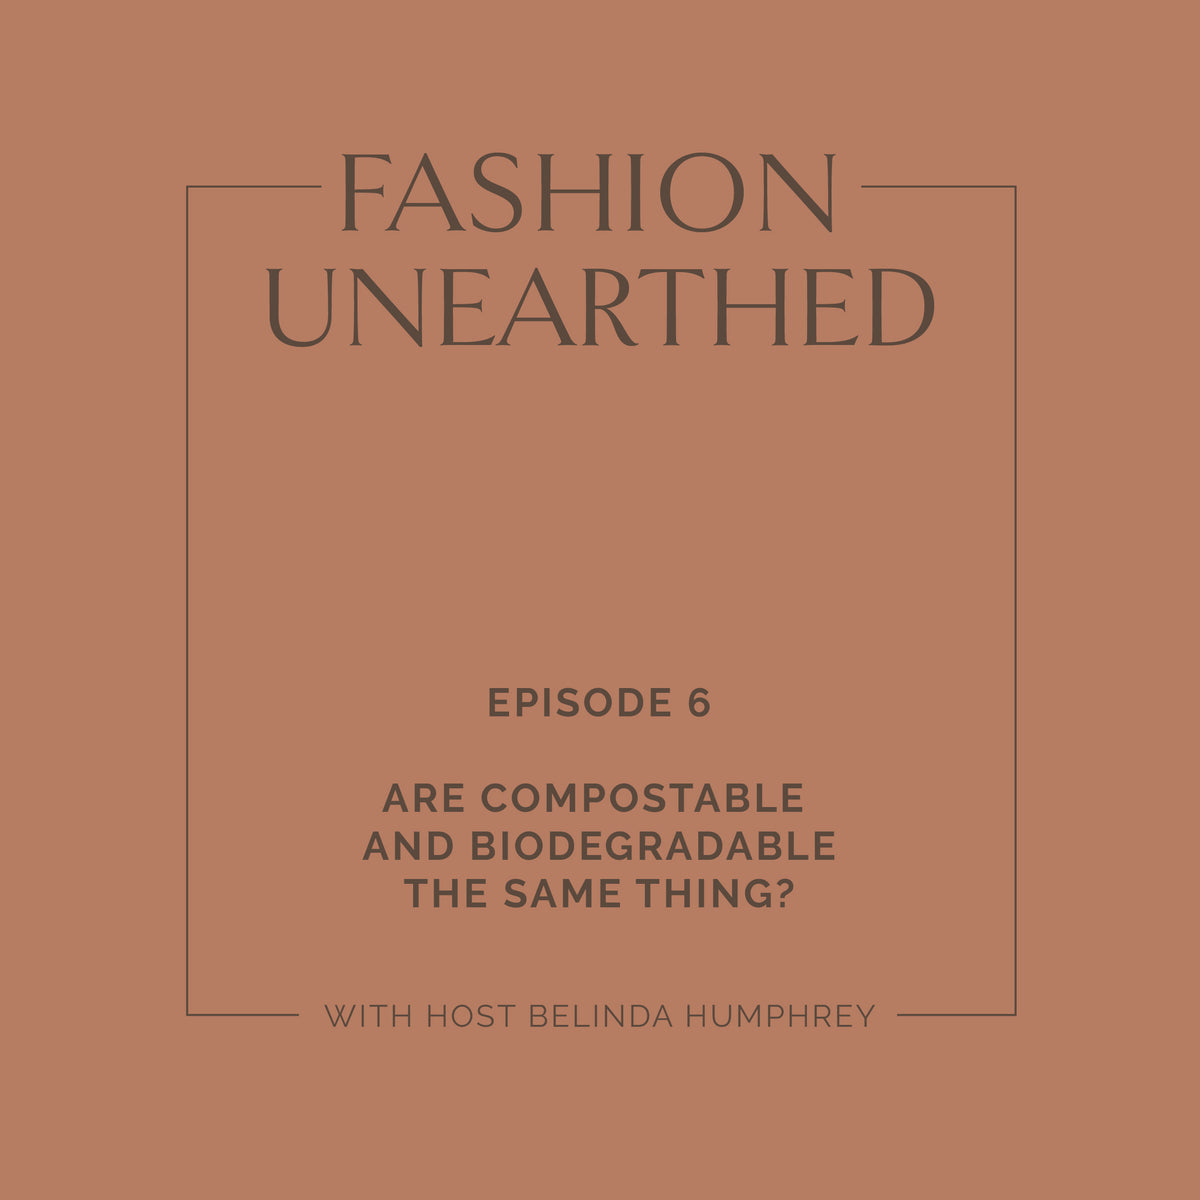 Episode 6: Are Compostable and Biodegradable the same thing?